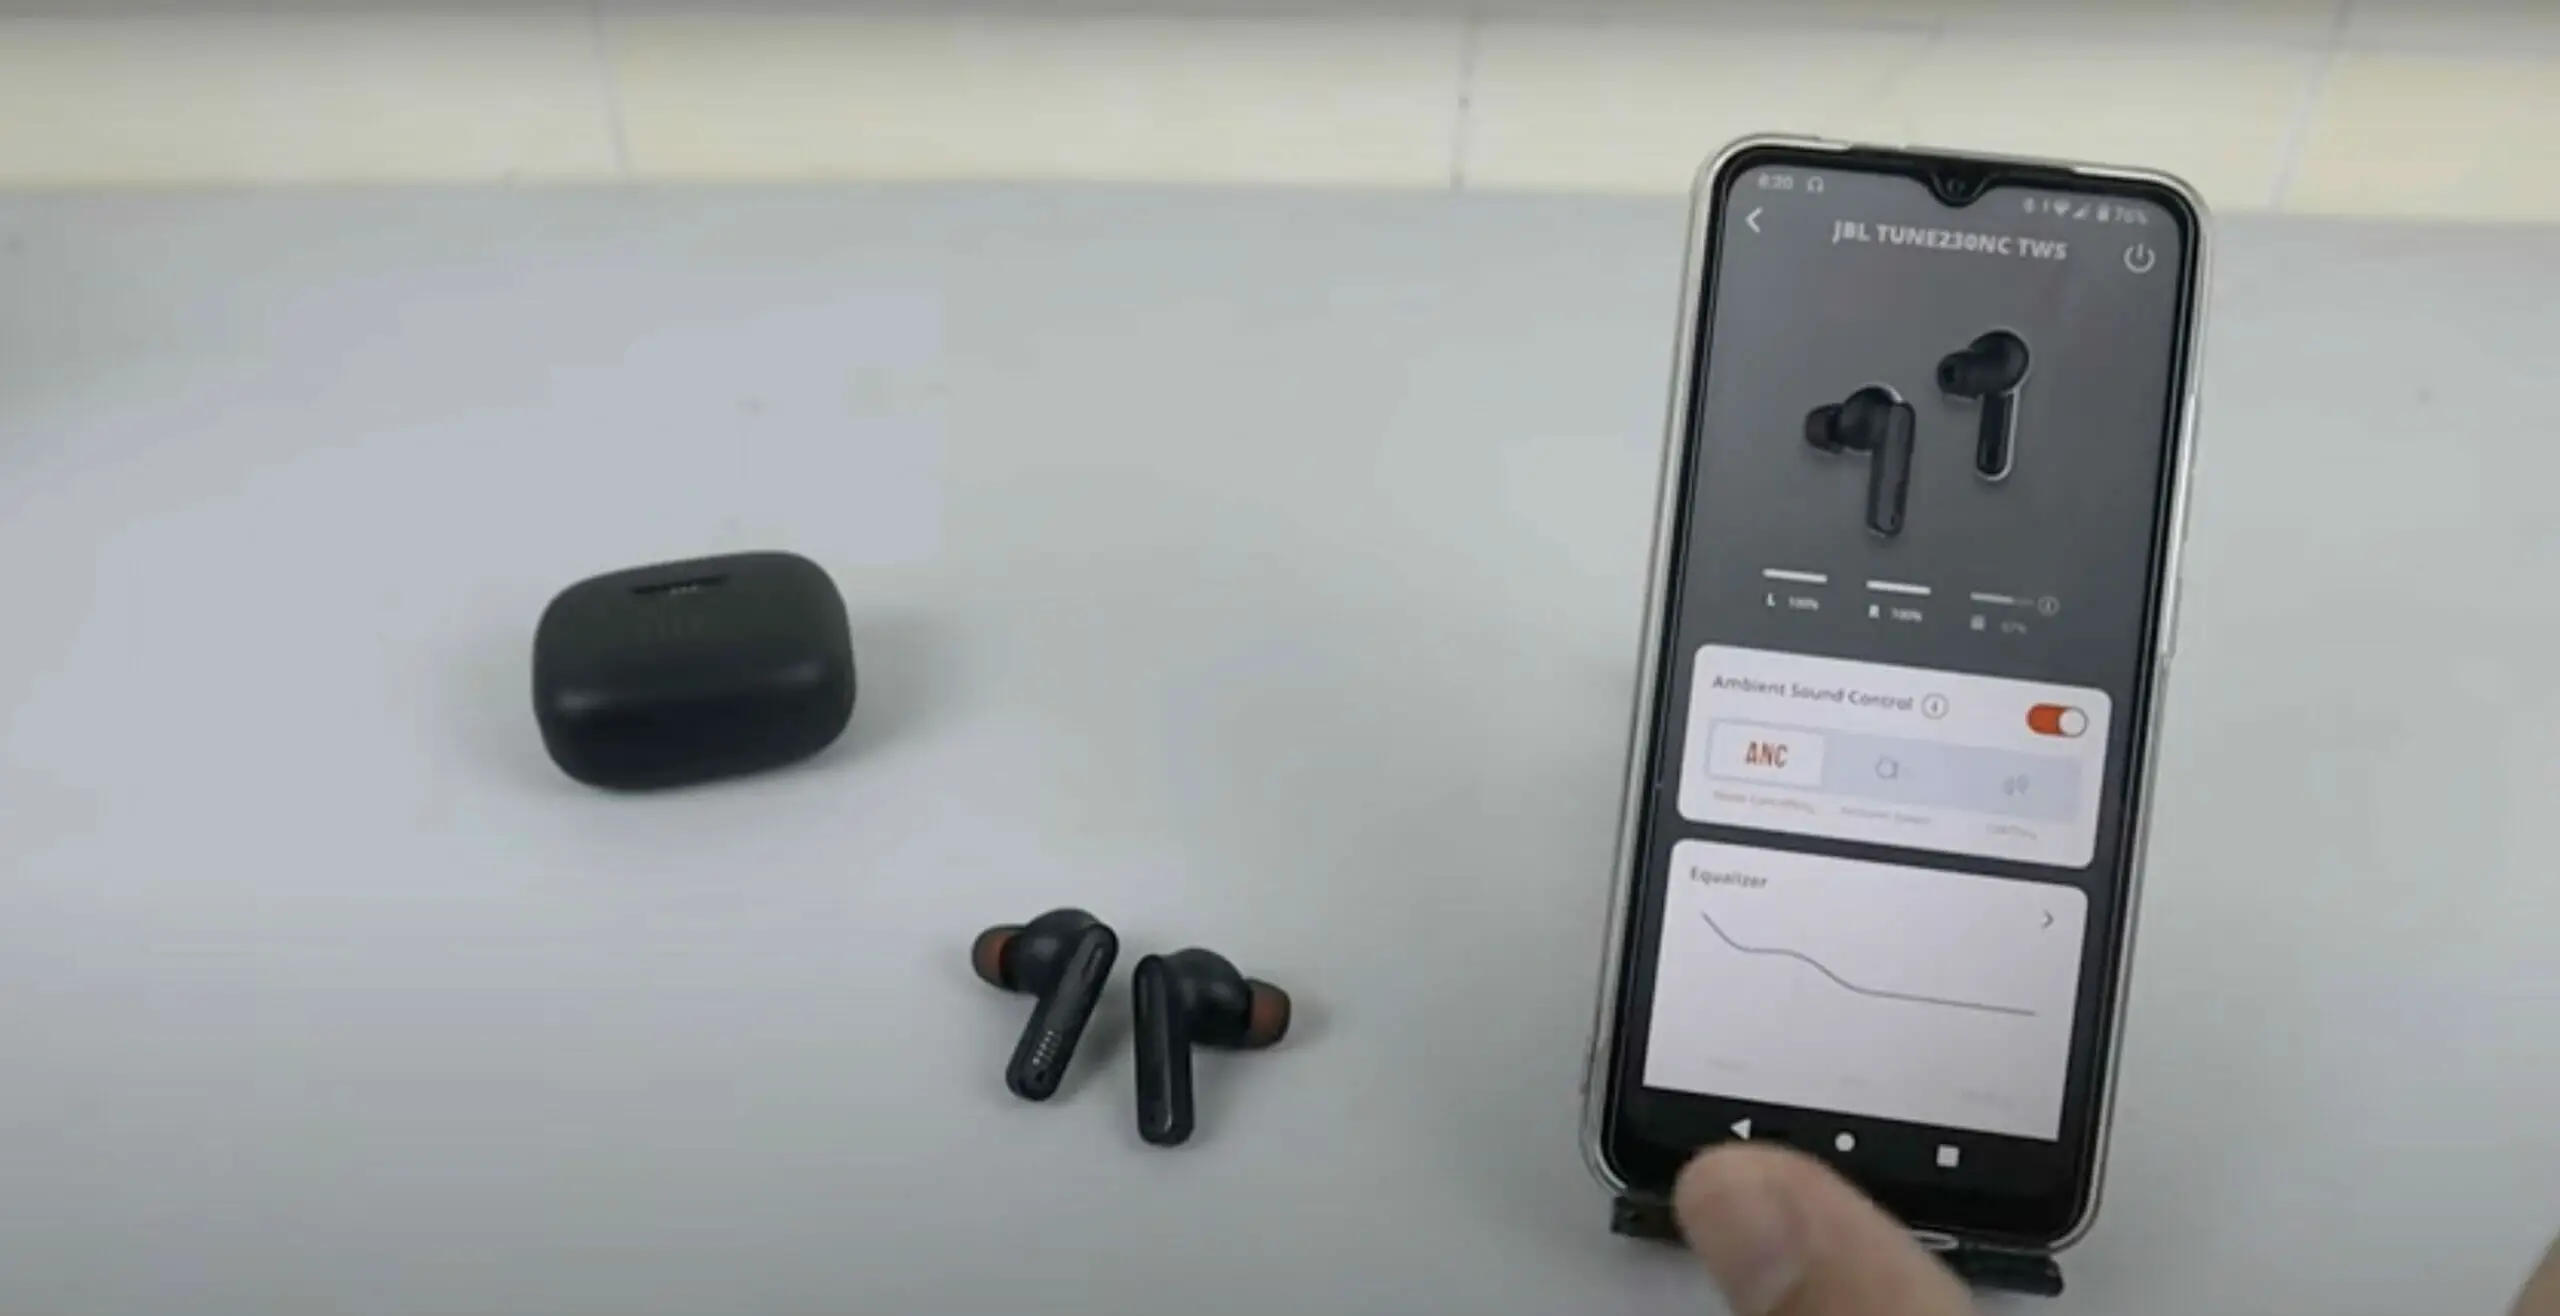 JBL earbuds besides a phone